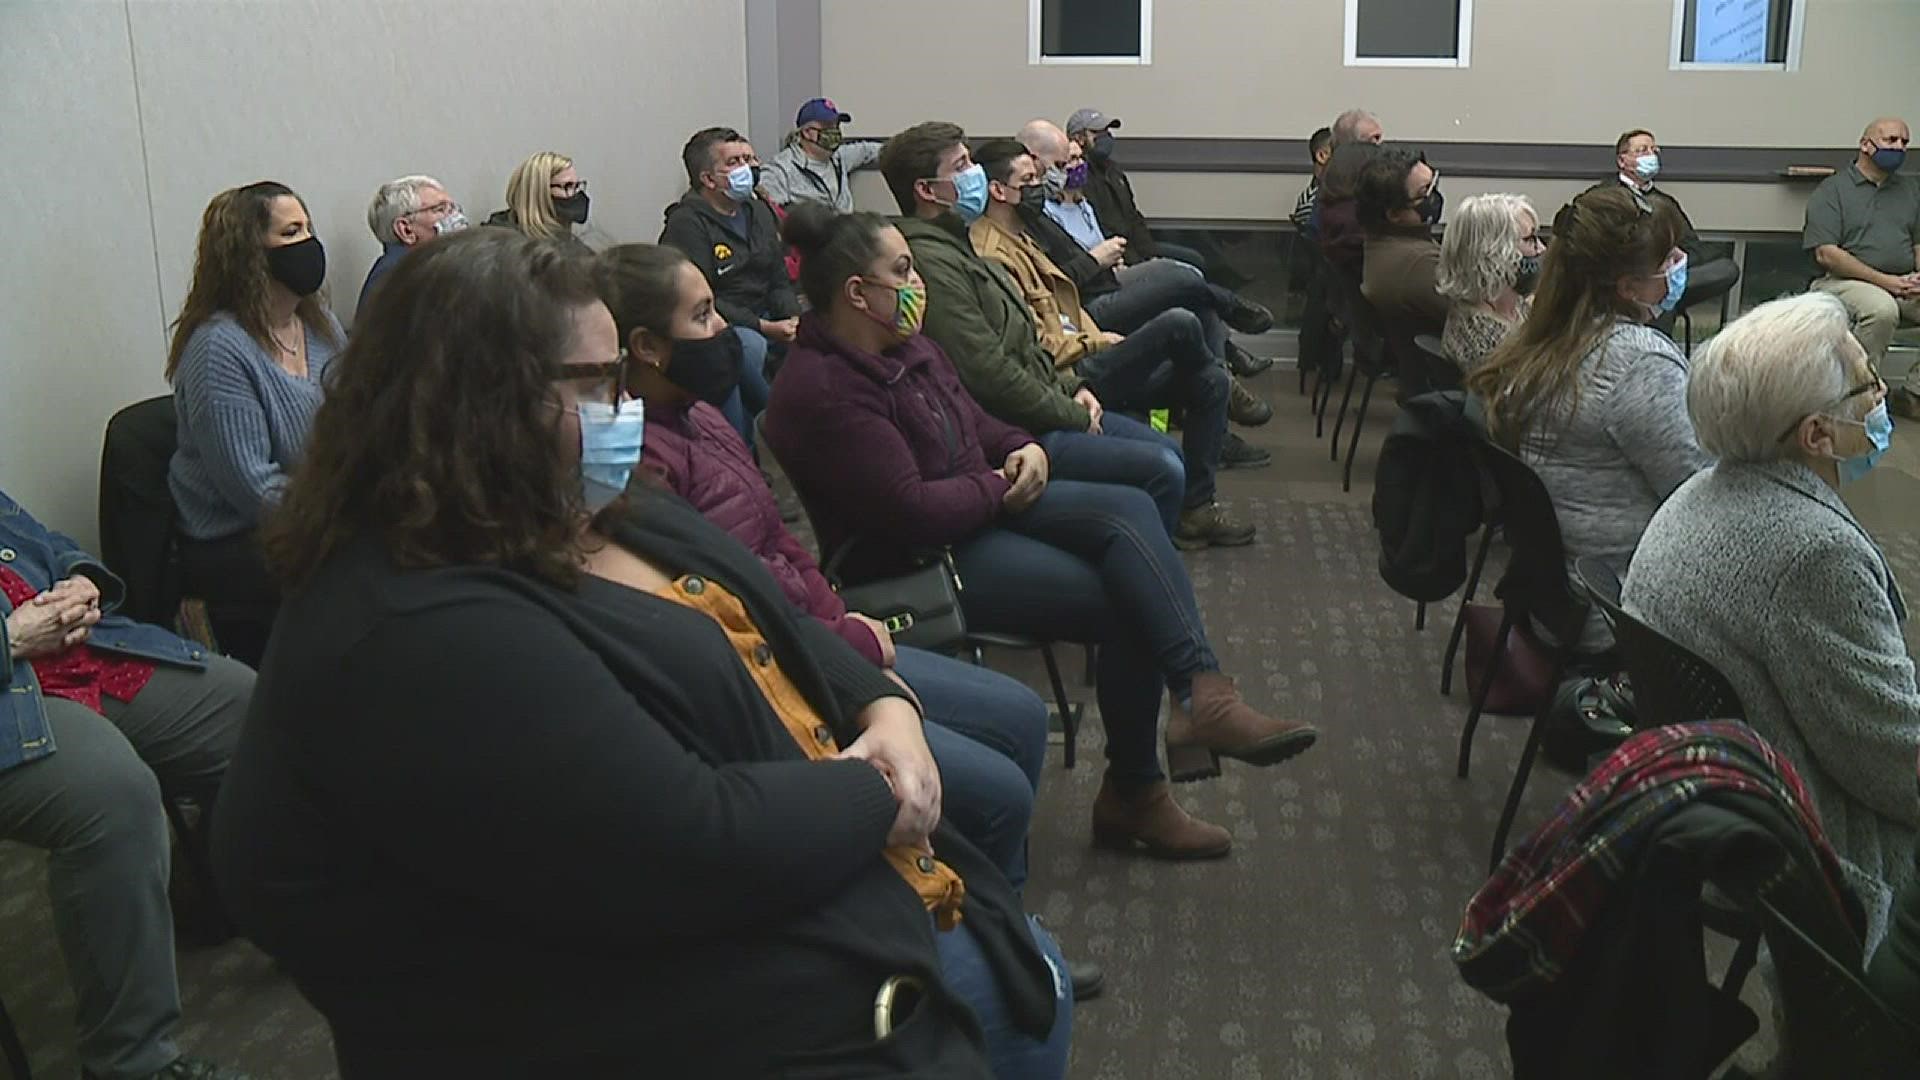 The mayor held a listening session with community members on Monday night. More than two dozen people came to voice their opinion on changing the rules.